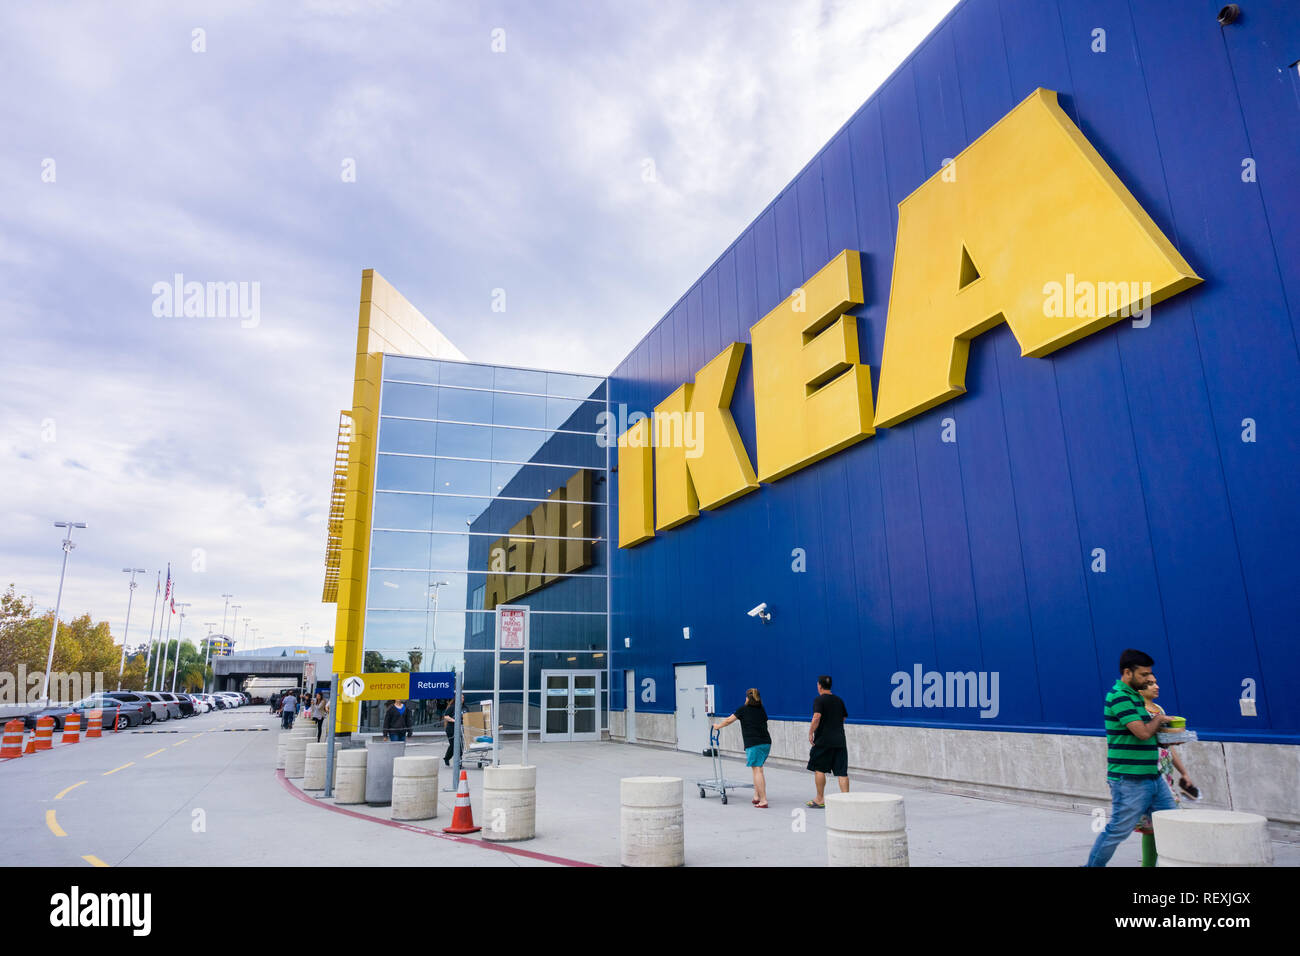 November 25, 2017 East Palo Alto/CA/USA - People shopping at the IKEA store in Silicon Valley, San Francisco bay area Stock Photo